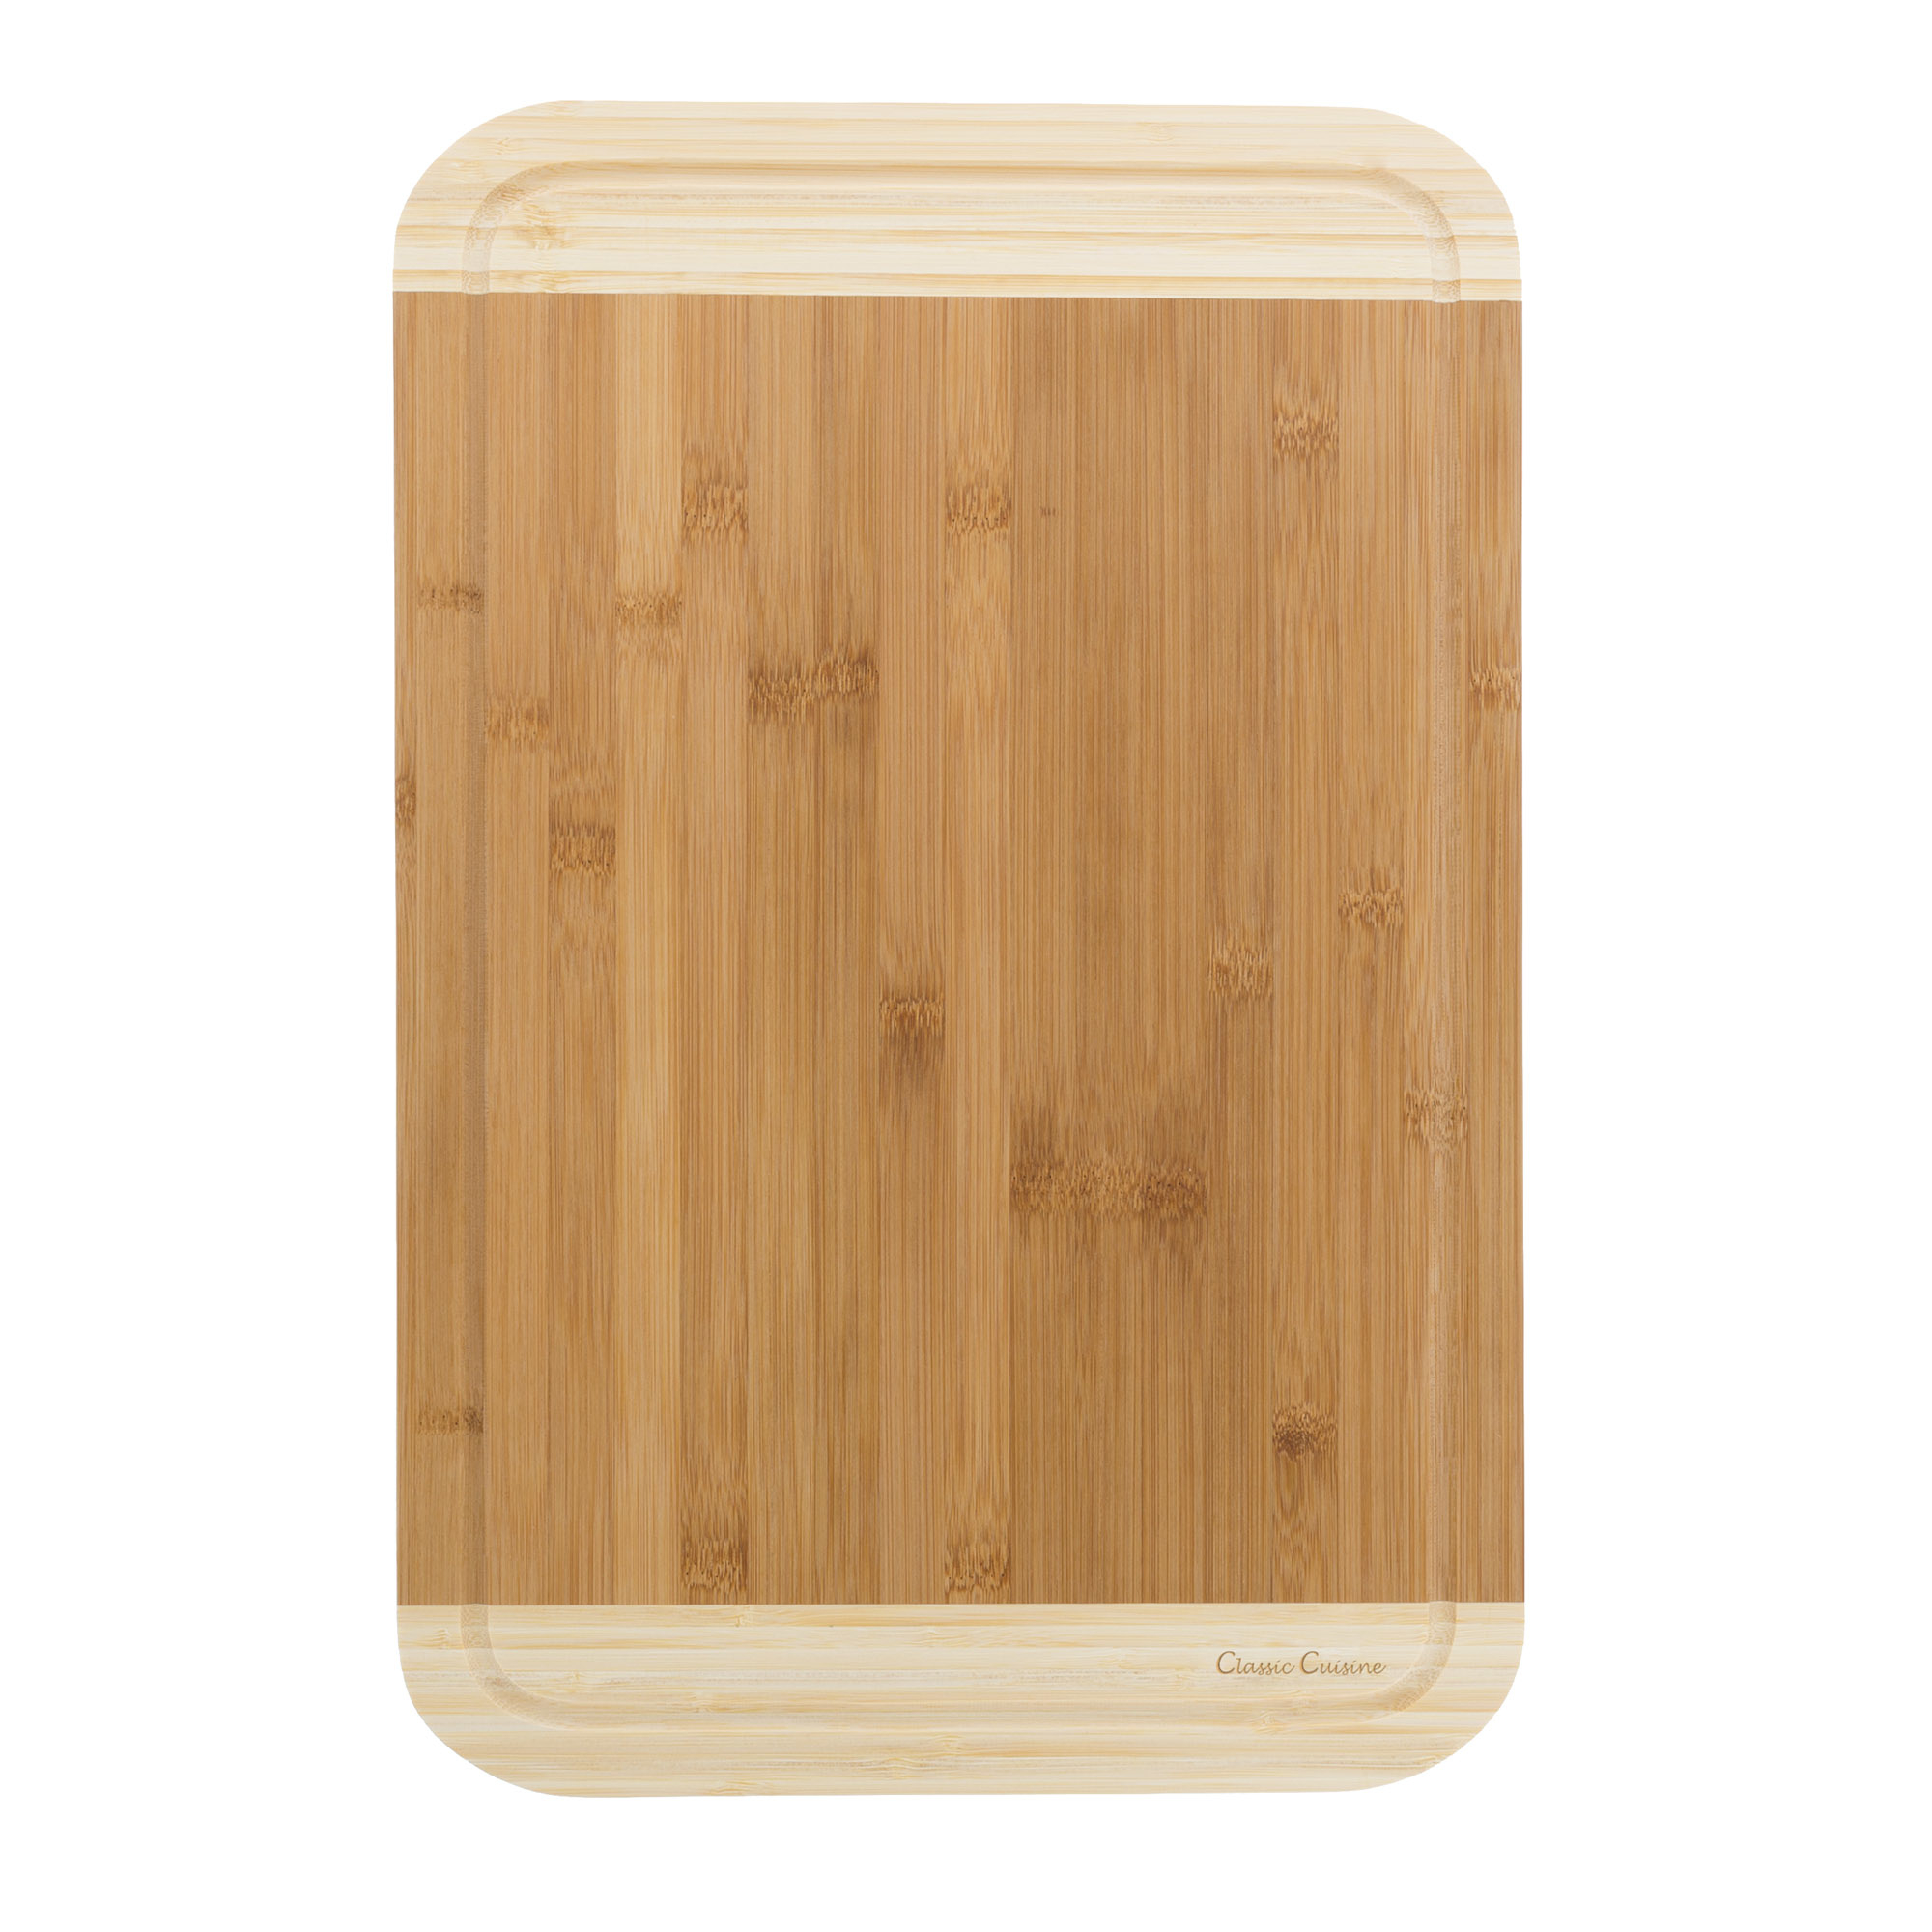 Wooden Thick Bamboo Professional Quality Cutting Board 81 x 12 Inches Juice Groove Antibacterial